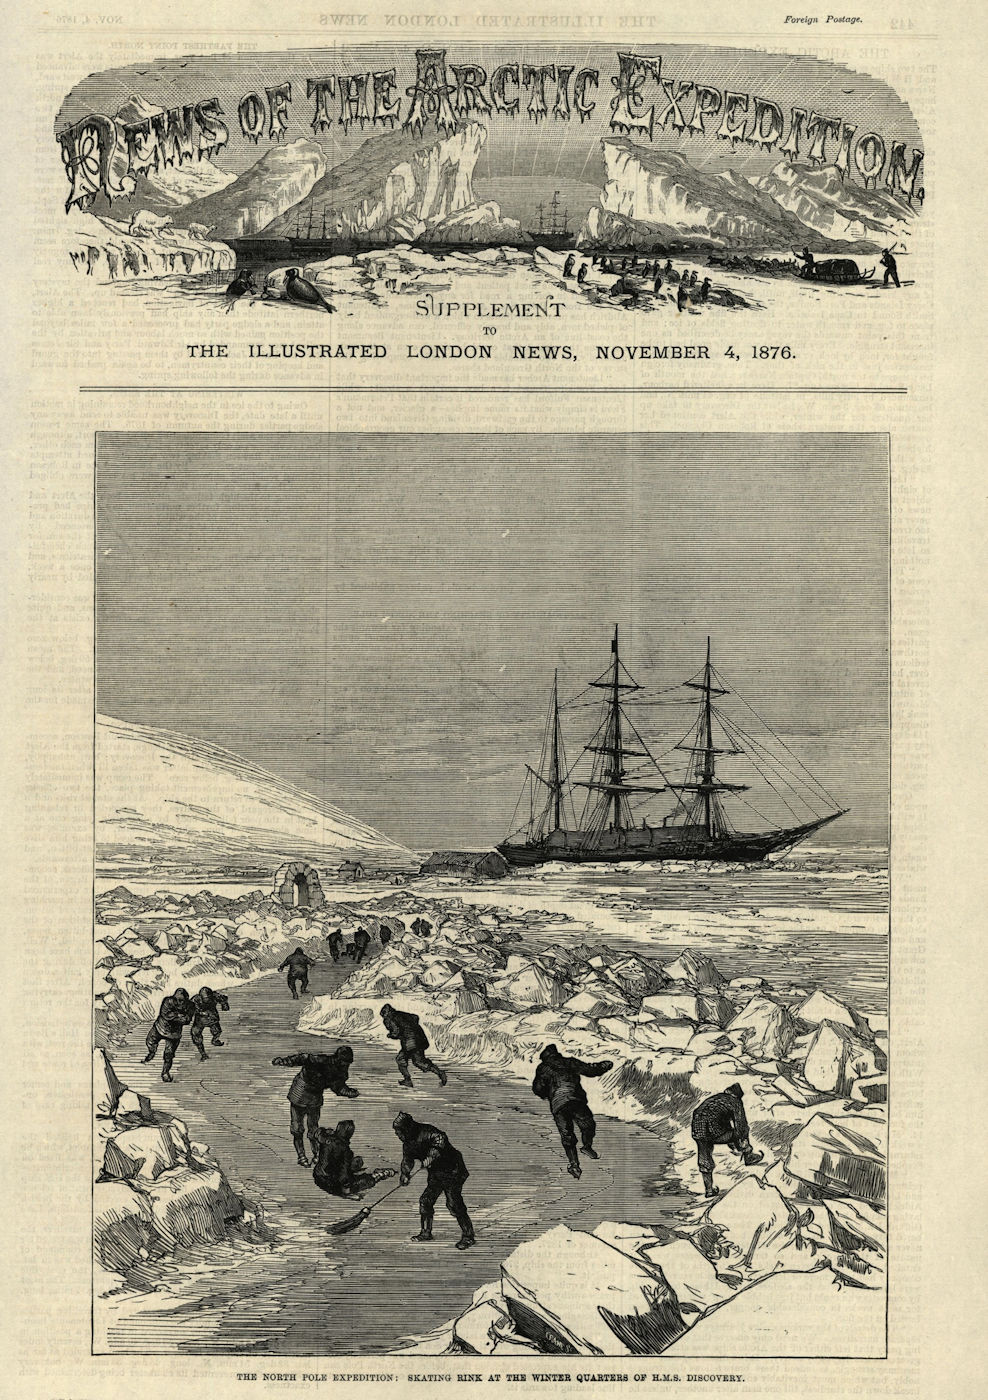 The North Pole expedition: skating rink at HMS Discovery's winter quarters 1876